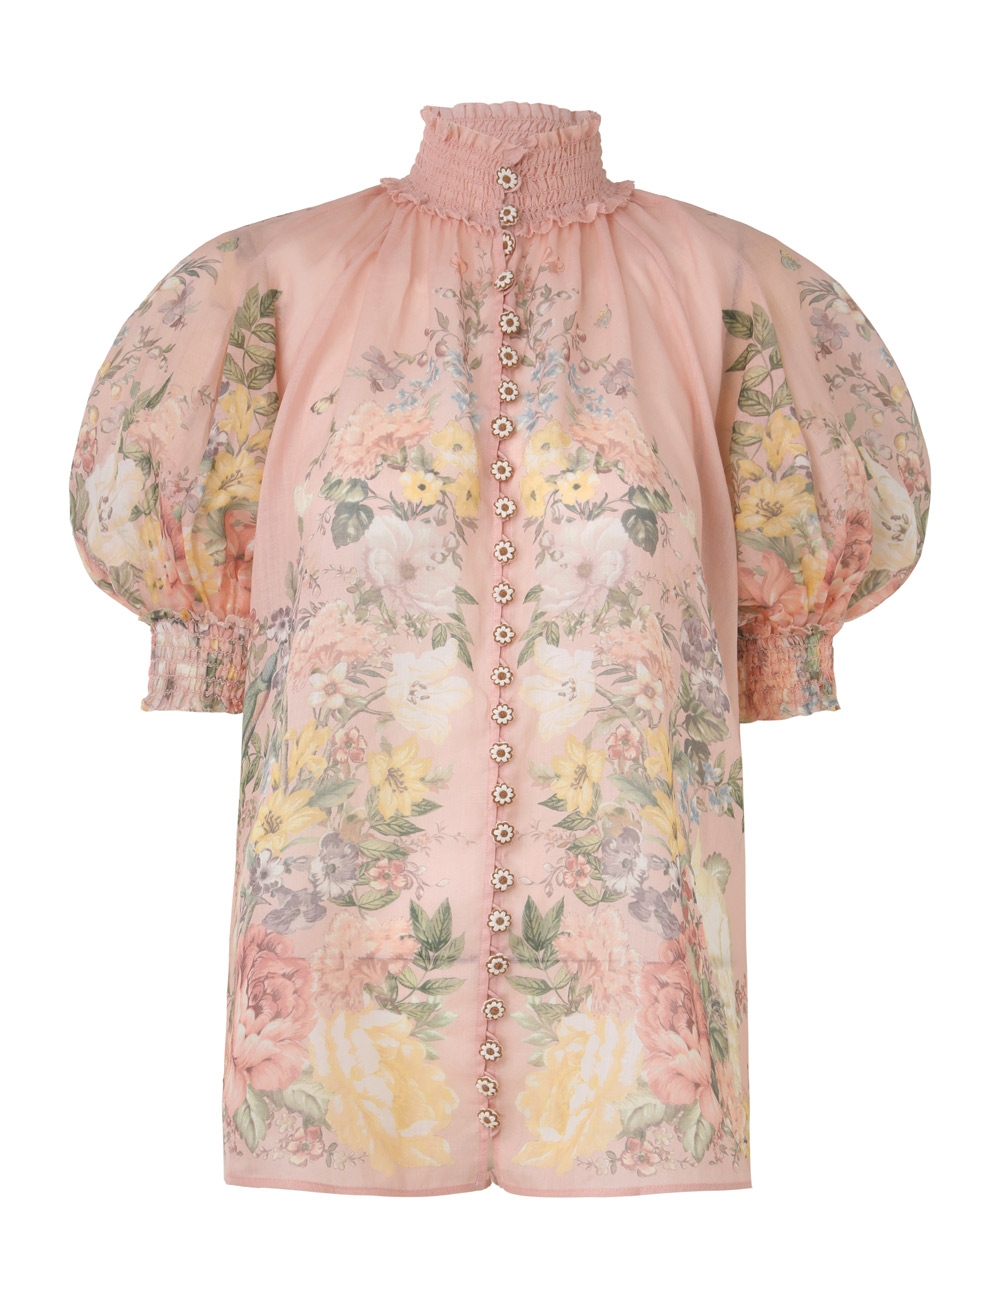 Zimmermann Waverly Short Sleeves Blouse Pink In Pink Floral